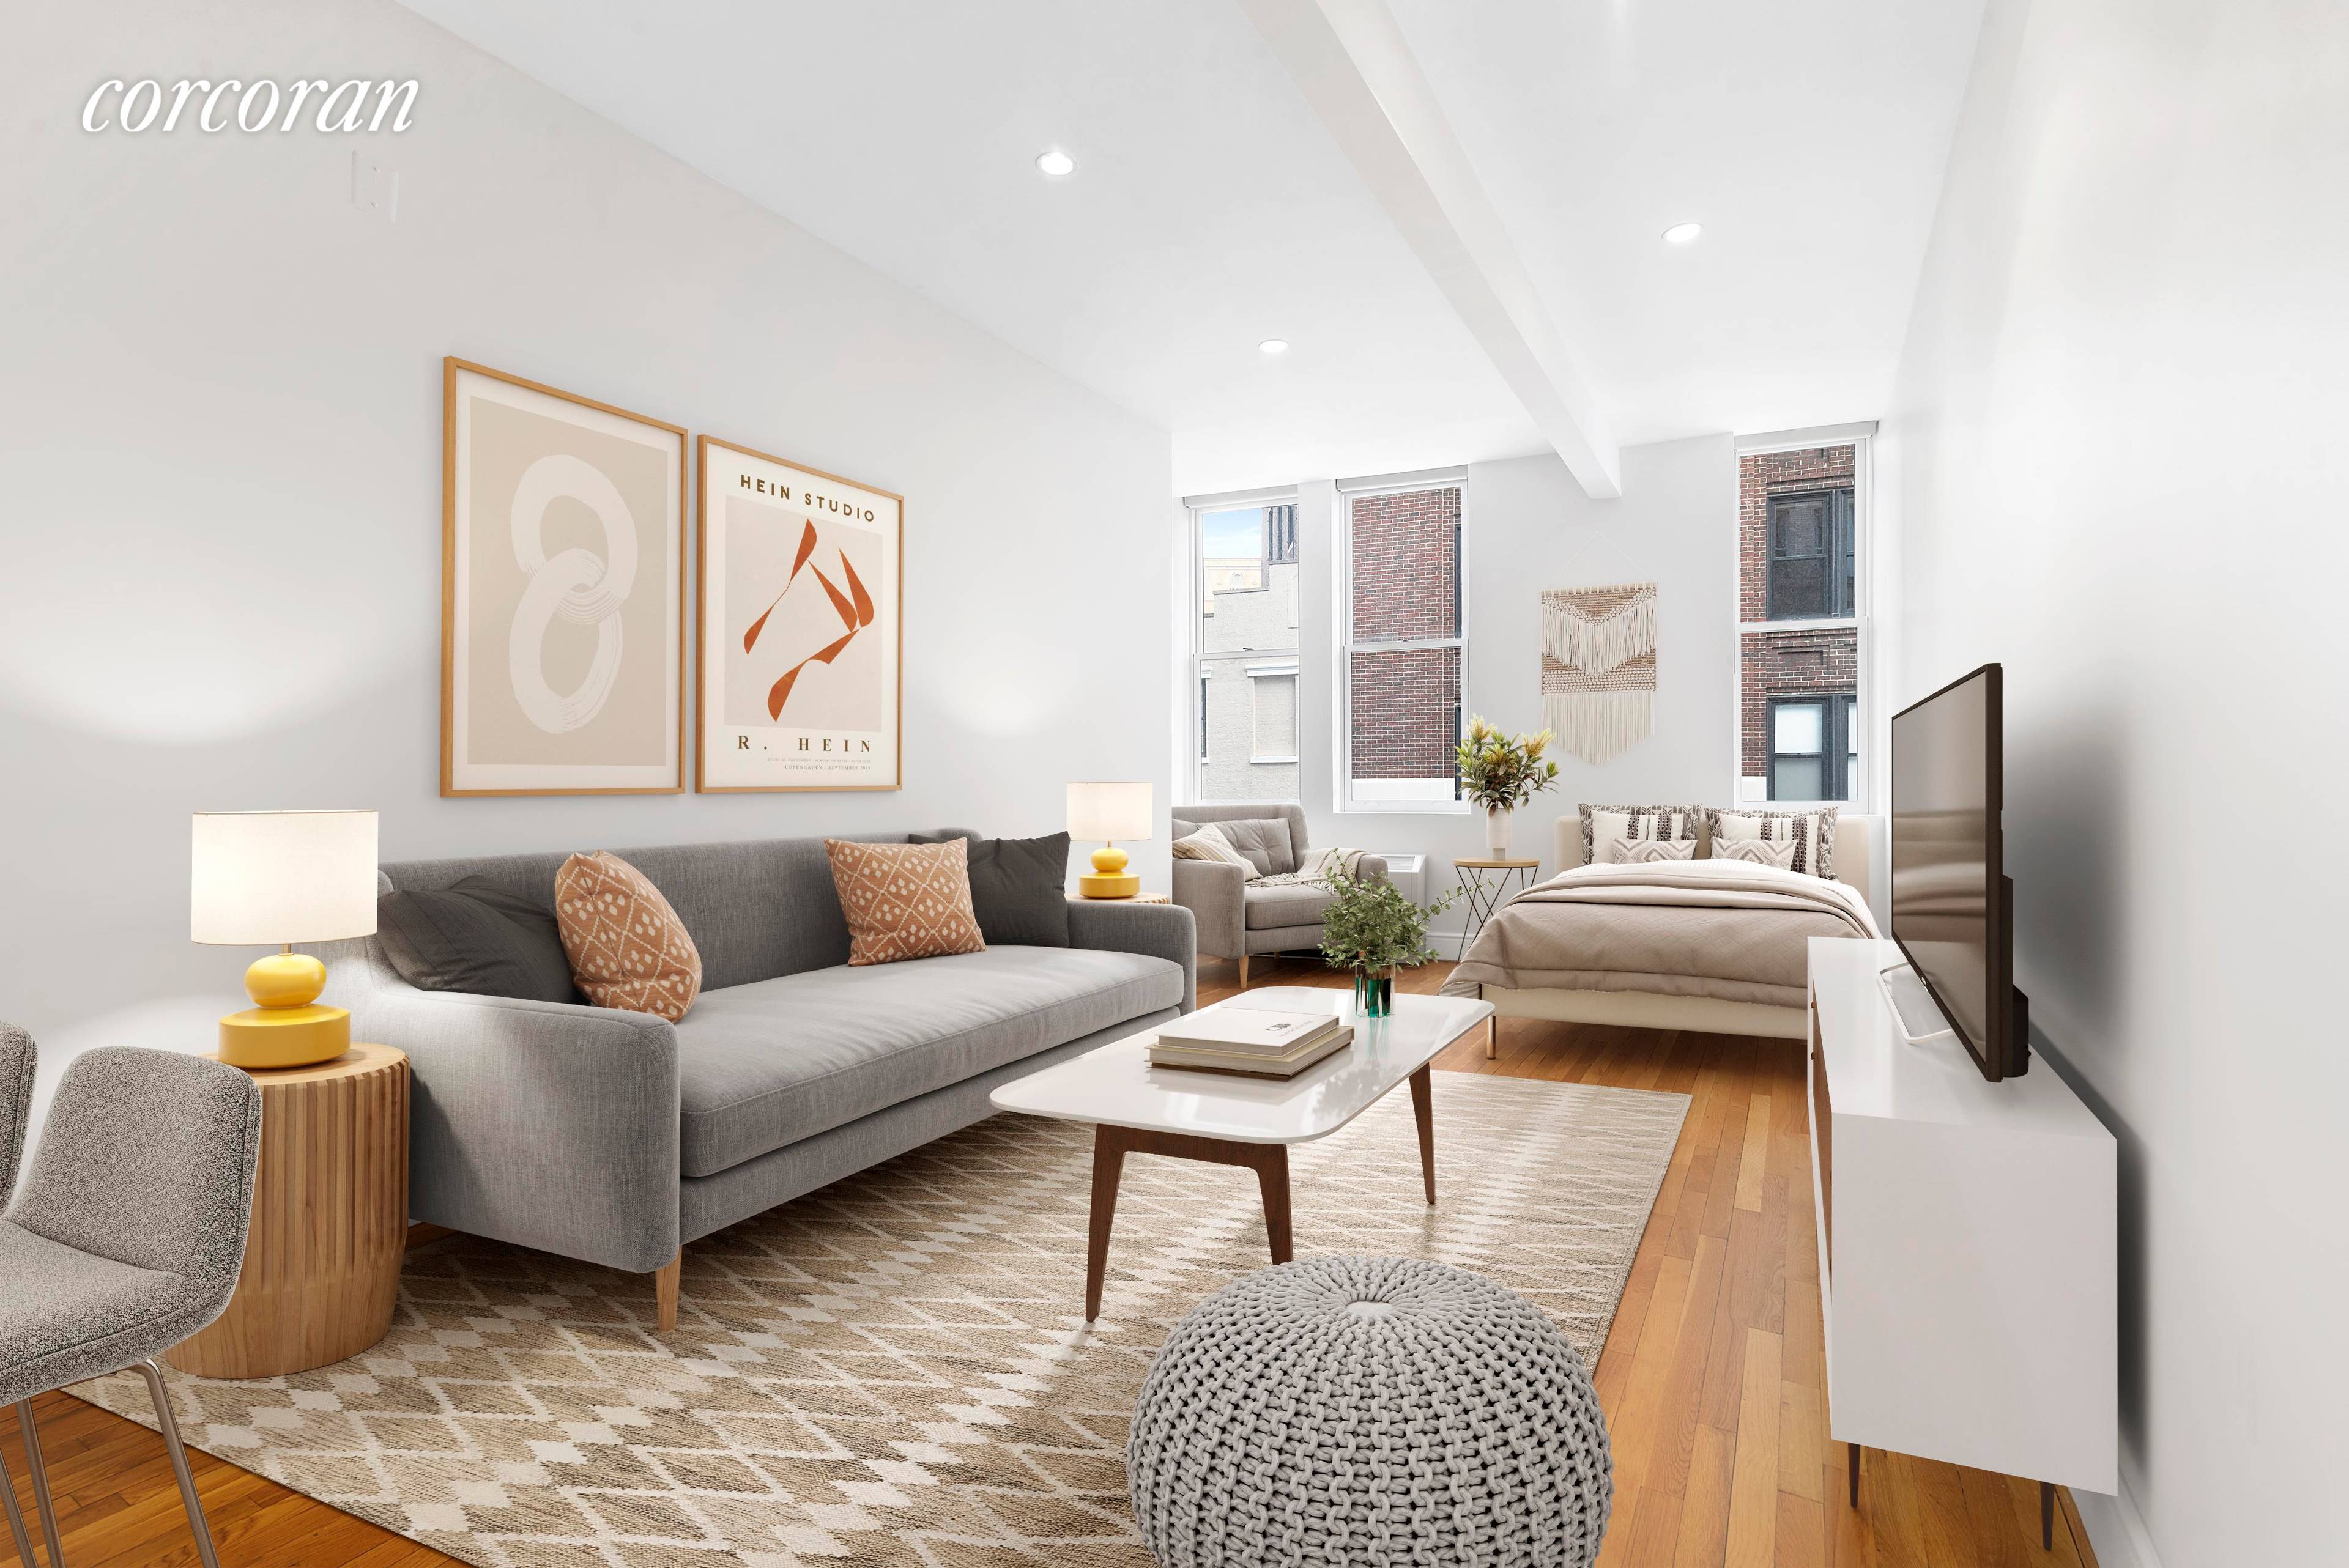 Enhance your lifestyle at 9 Barrow Street, a celebrated prewar coop nestled on a quaint block in the West Village with a doorman and recently updated elevators.